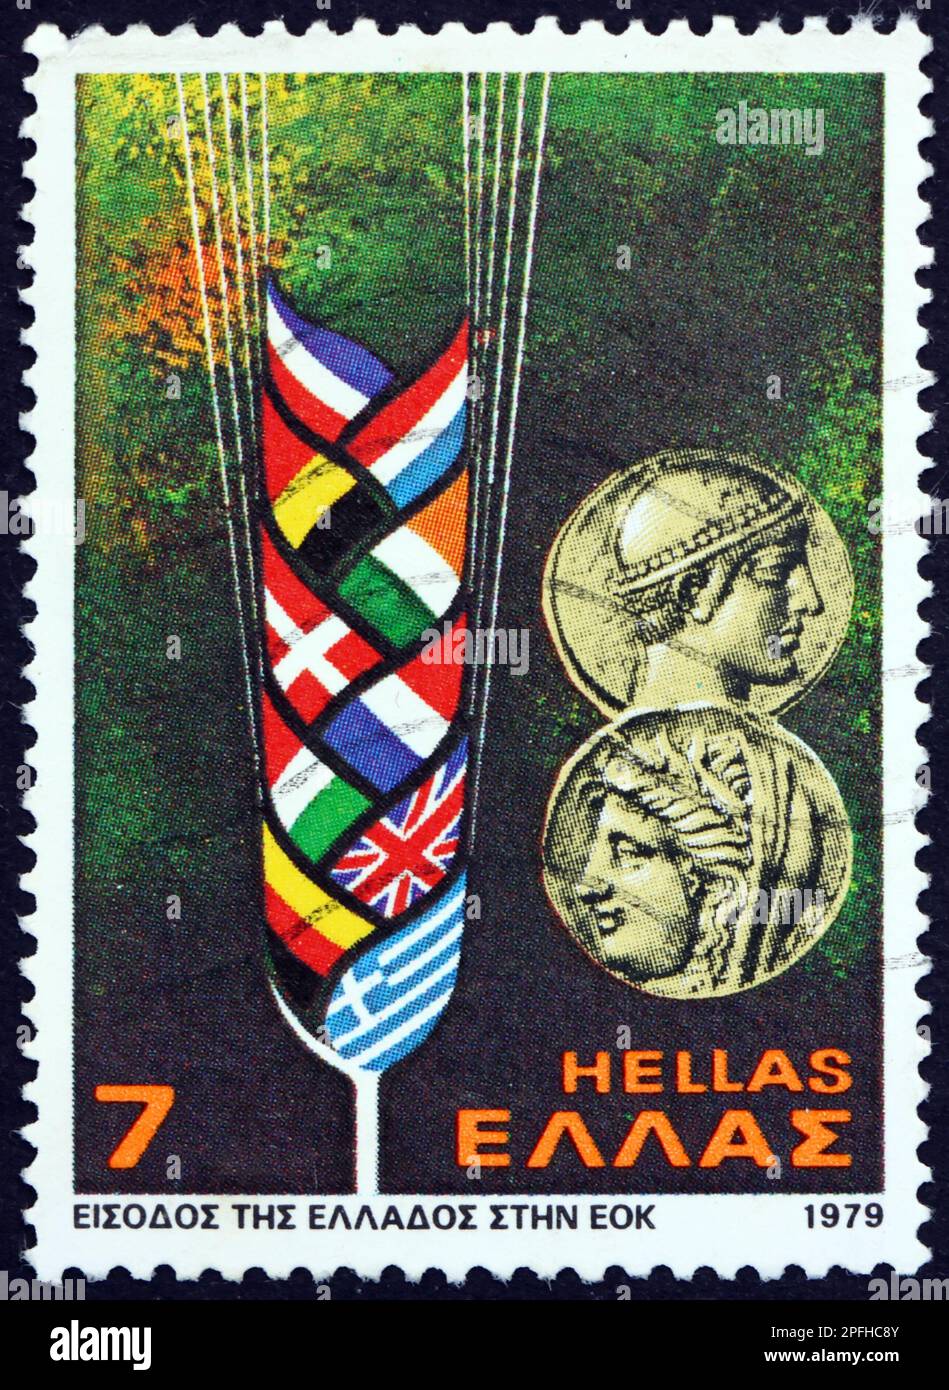 GREECE - CIRCA 1979: a stamp printed in Greece shows wheat with members' flags and Greek coins, Greece's entry into European Economic Community, and p Stock Photo